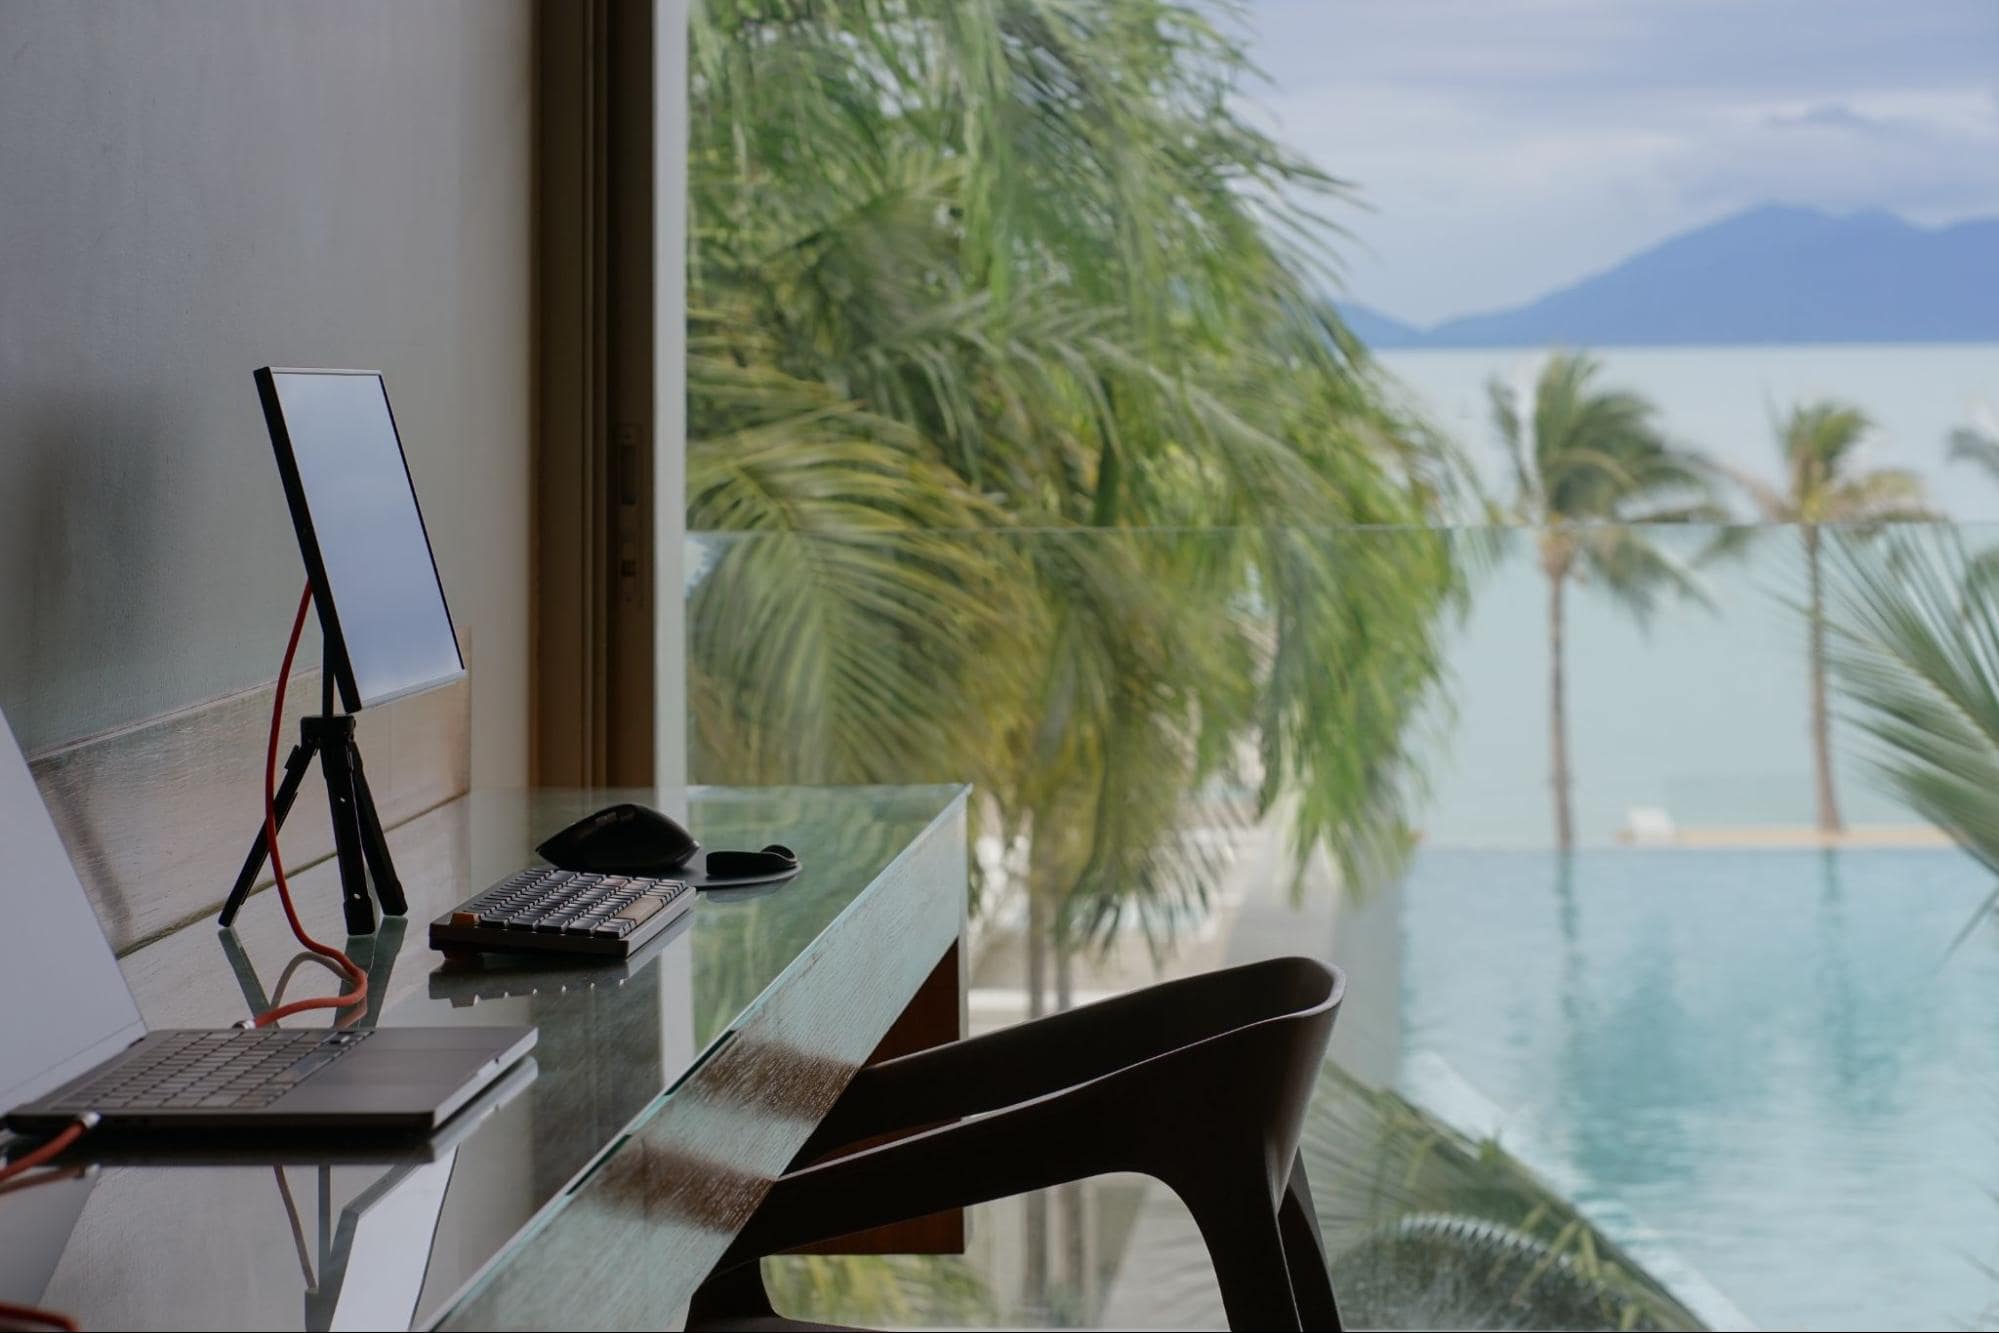 A tranquil workspace featuring a tablet on a stand and a keyboard with a stunning ocean view and palm trees in the background, offering a peaceful setting for focus and inspiration